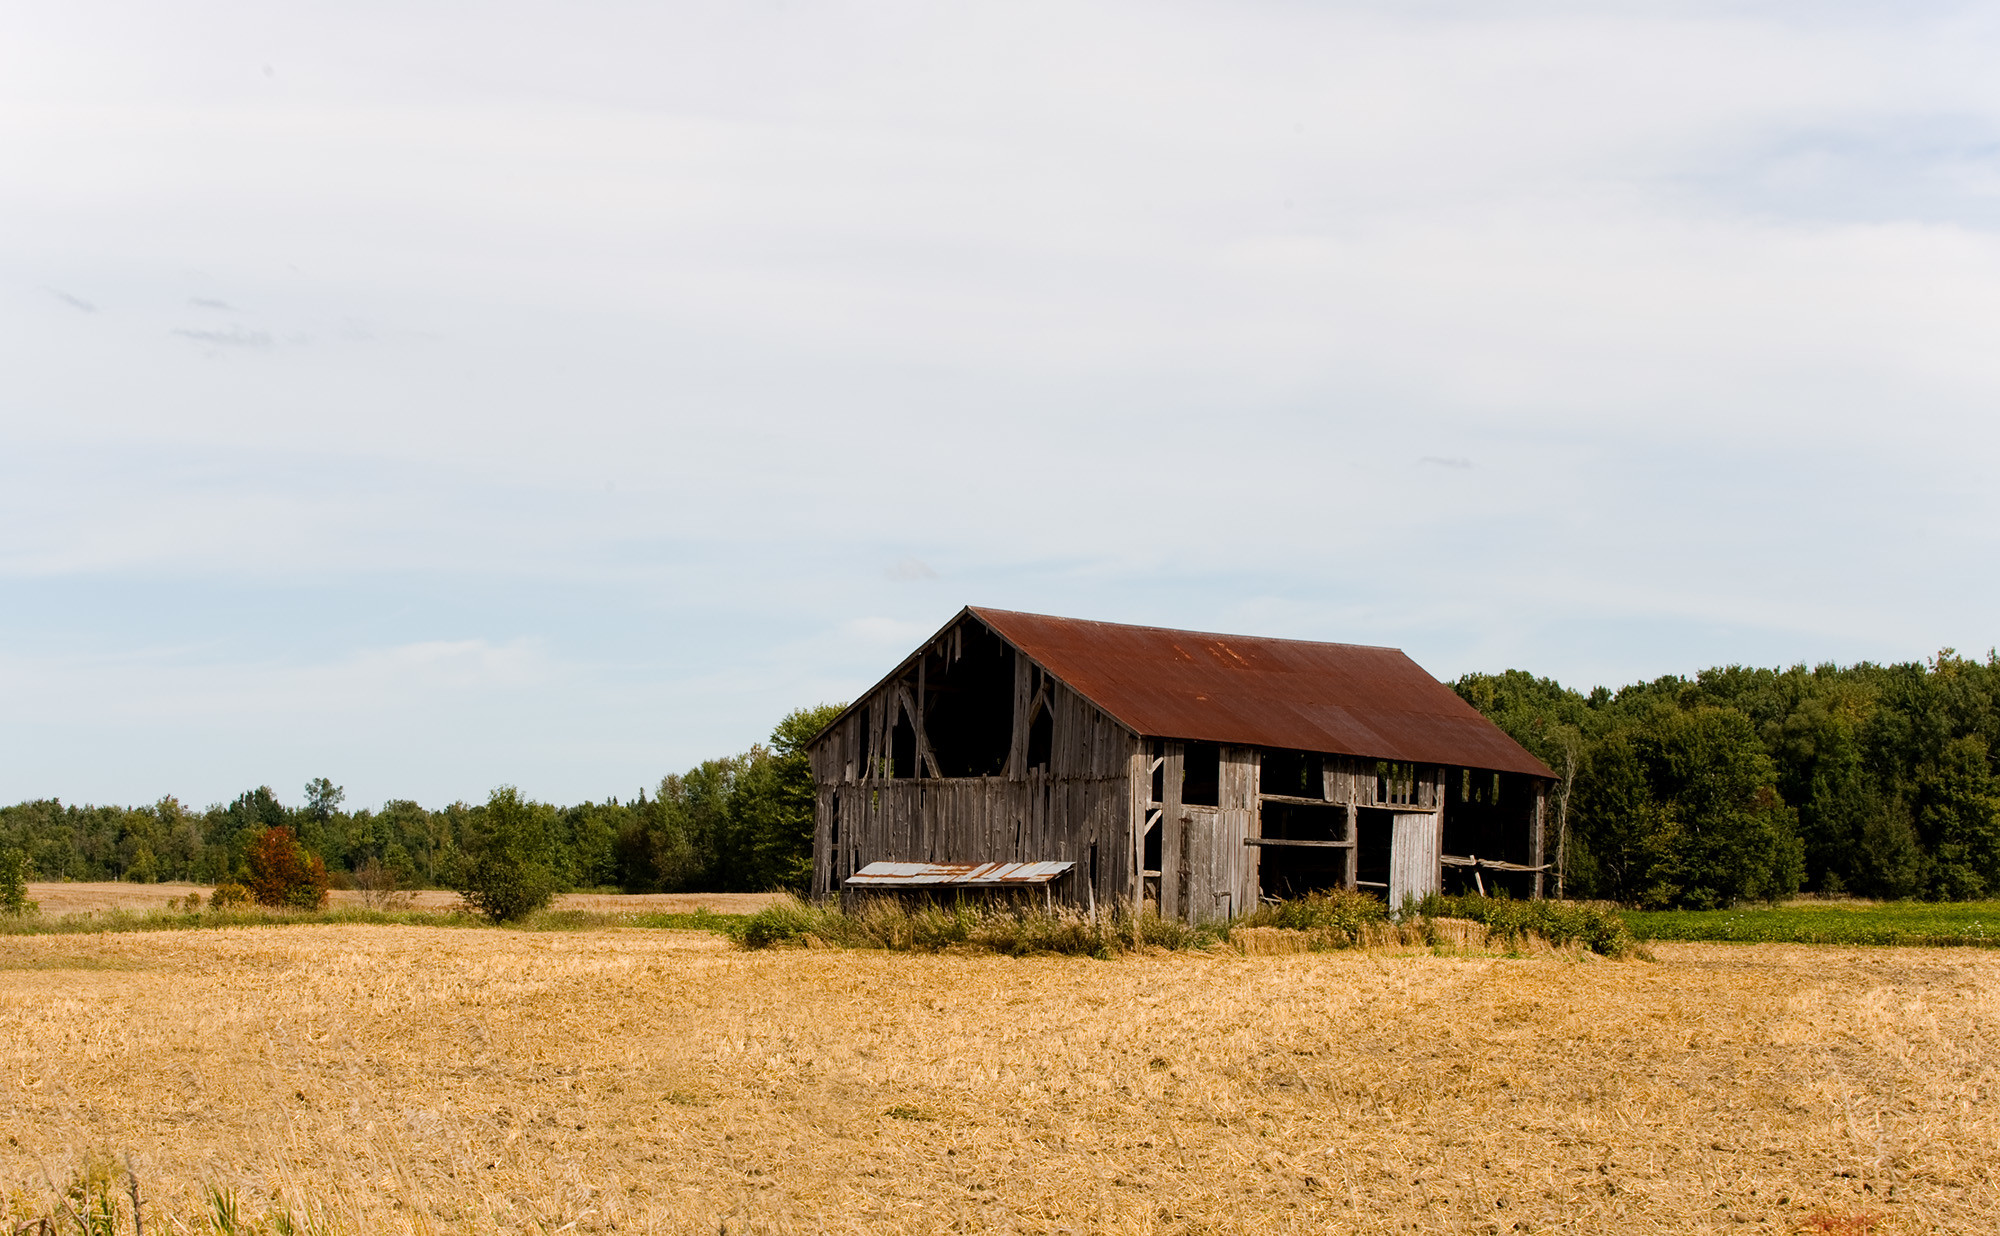 2000x1236 FarmStuff3, photo of old wooden barn, weathered from age with red roof  surrounded by